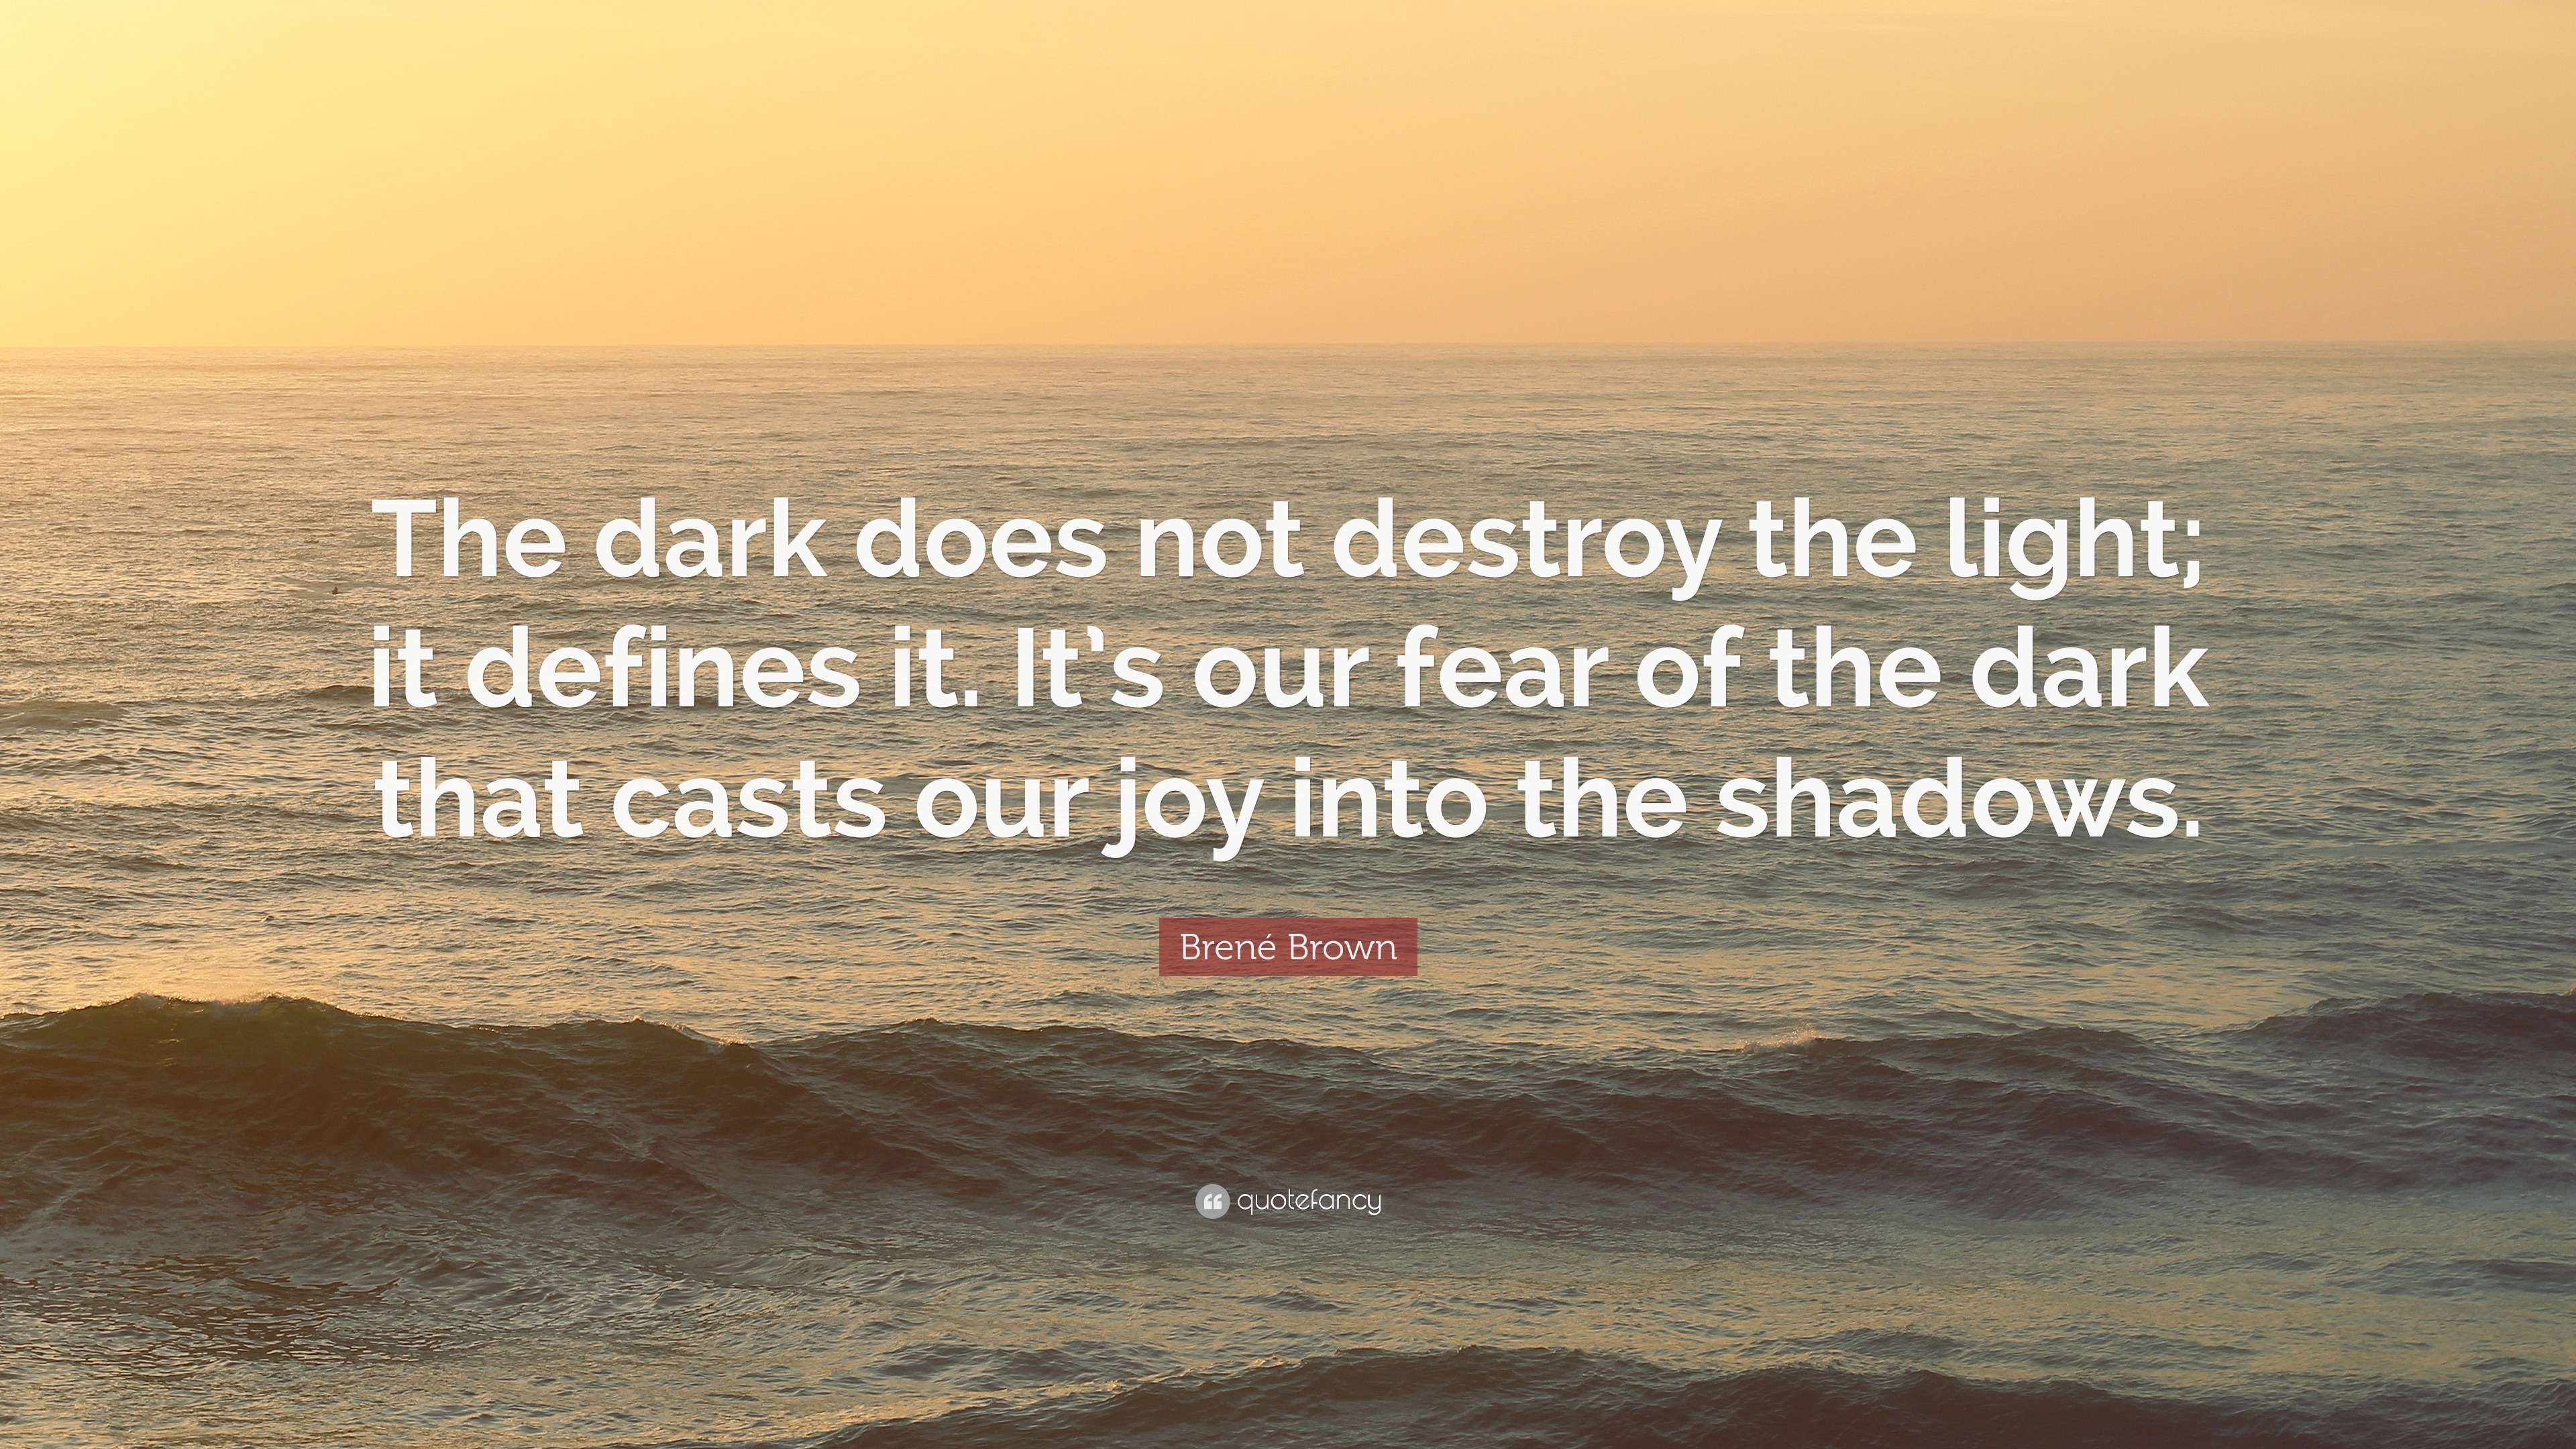 Brené Brown Quote: “The dark does not destroy the light; it defines it ...